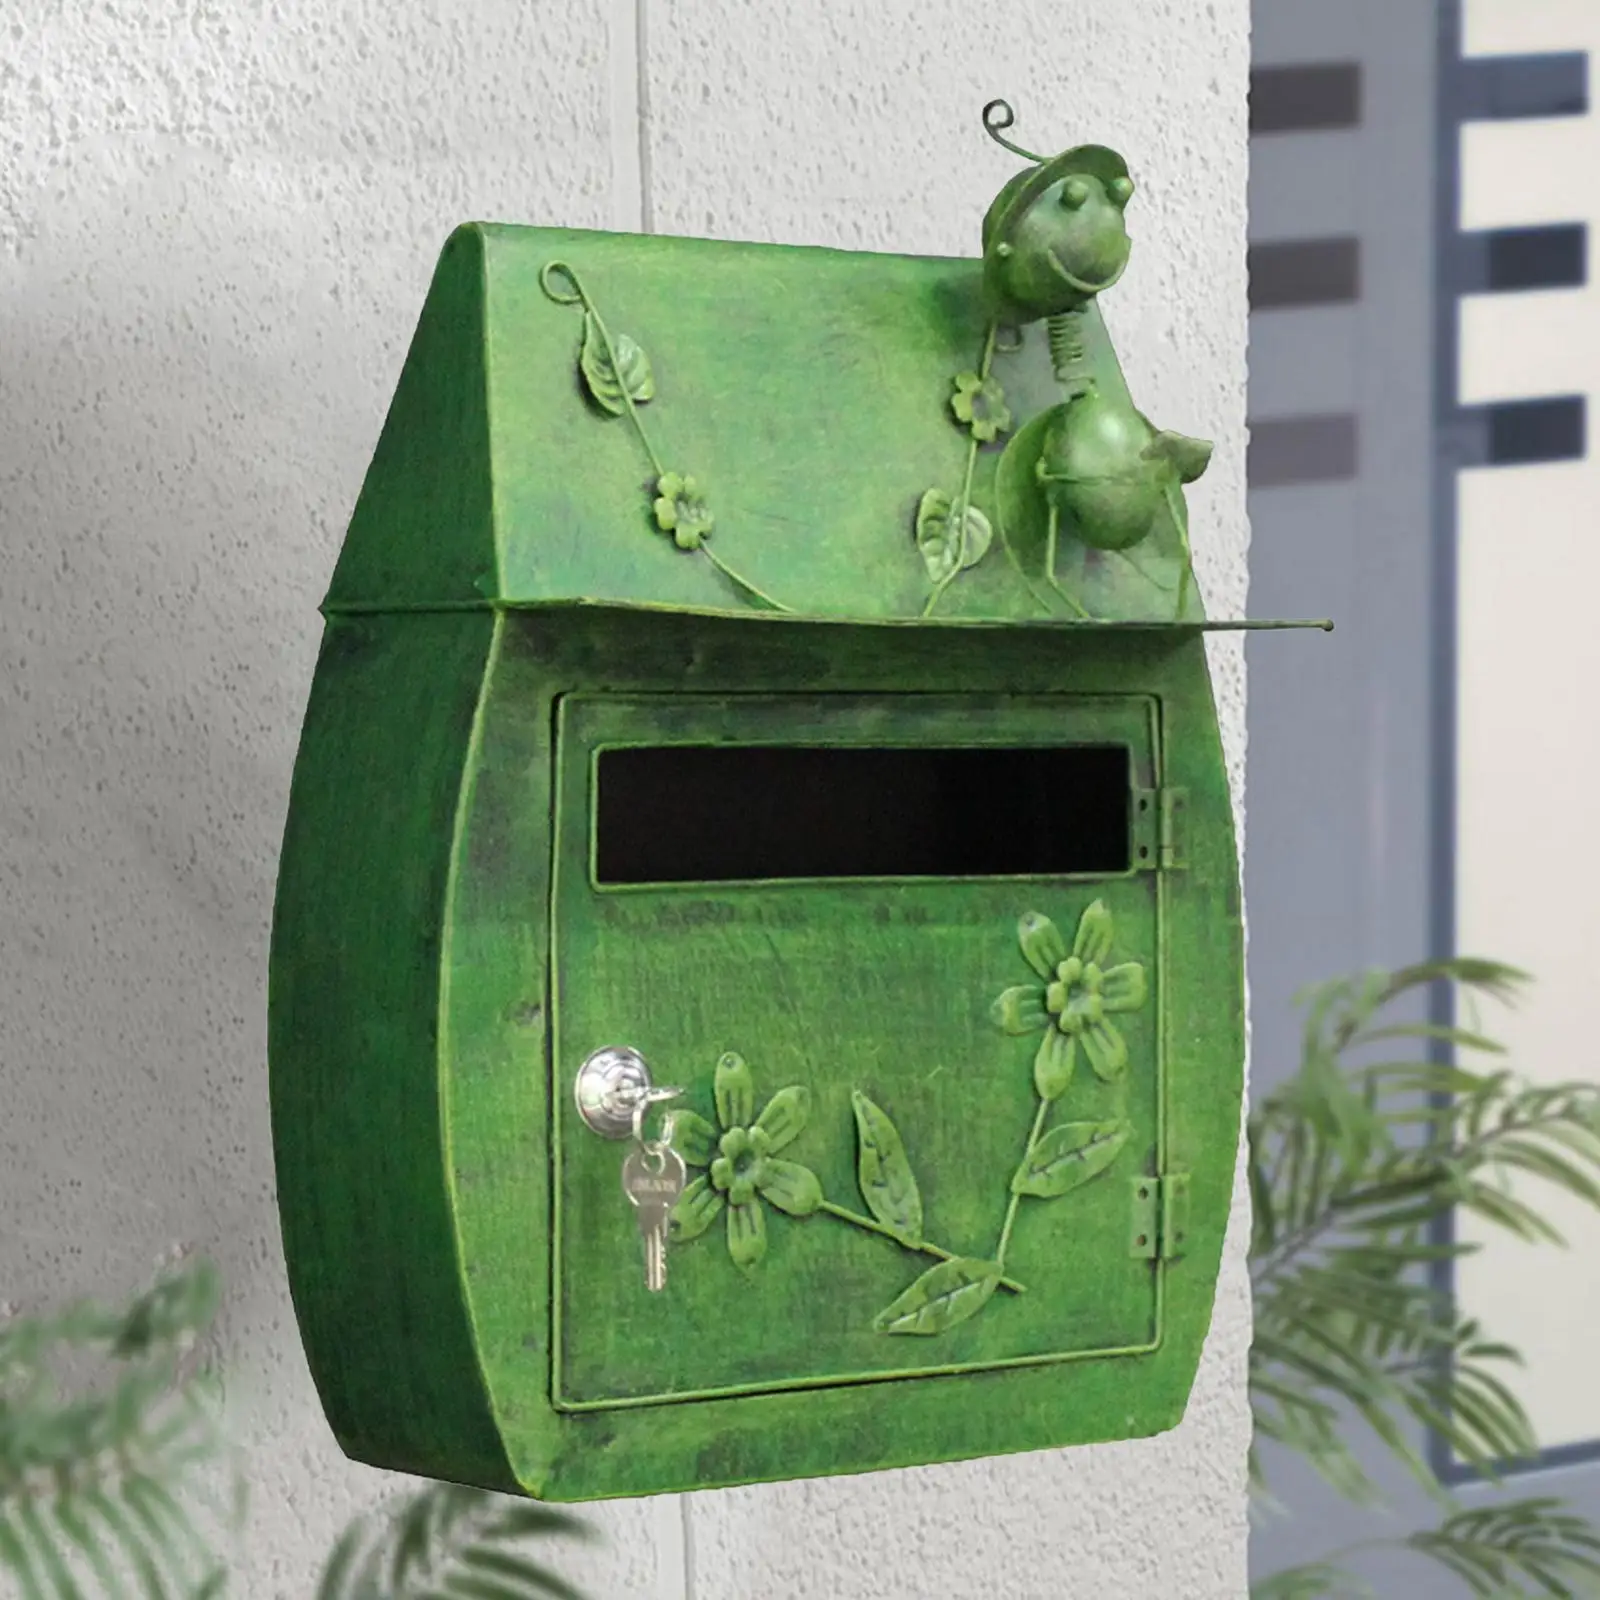 Vintage Pastoral Outdoor Iron Mailbox Lockable Wall Mounted Post Box Key Mailbox Rainproof Letterbox for Outdoor Garden Decor